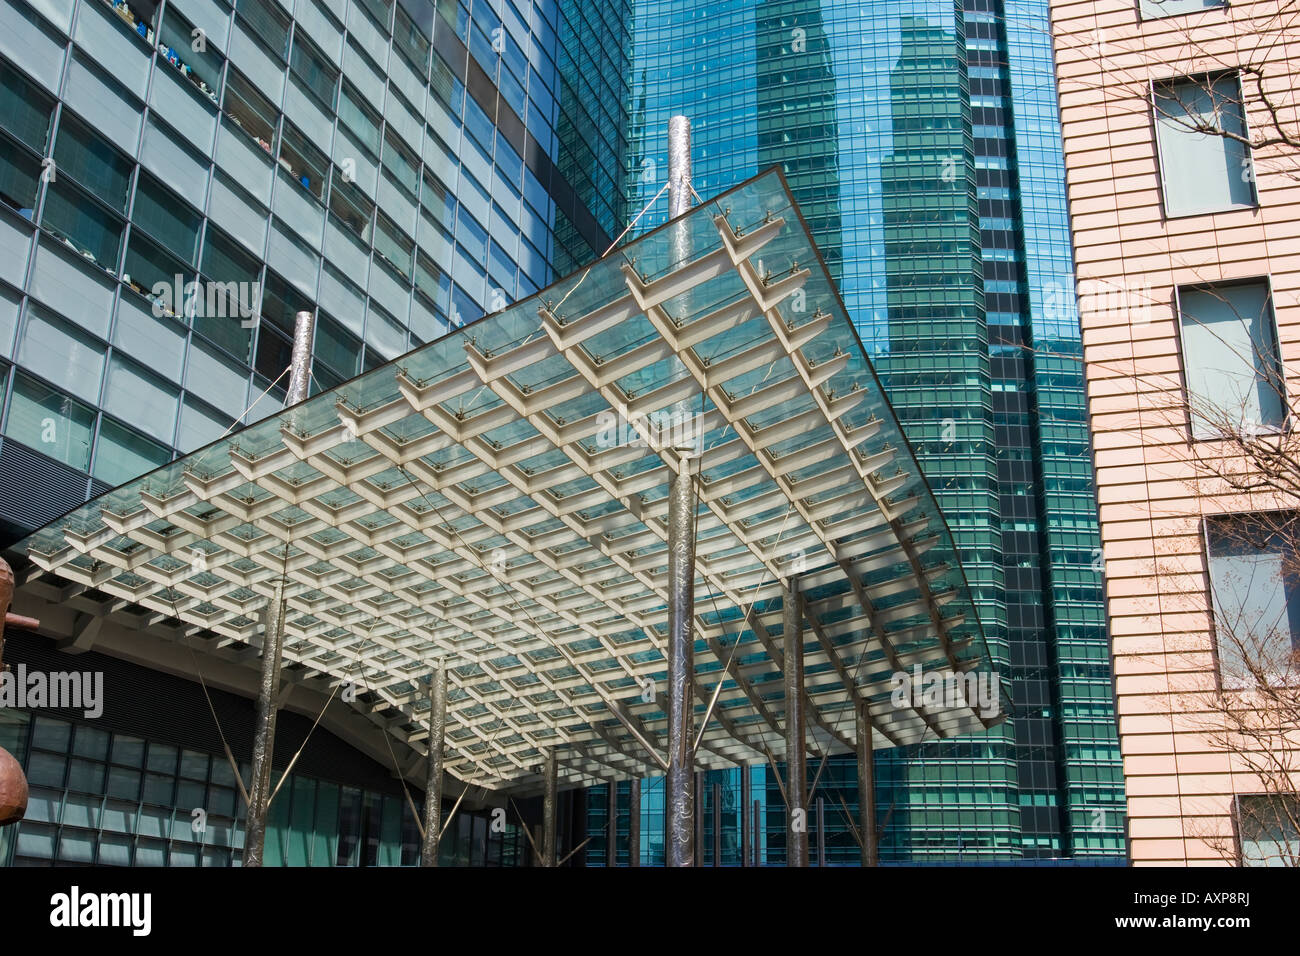 Modern design of office buildings with curved canopy in the Shiodome district of Tokyo Japan Stock Photo